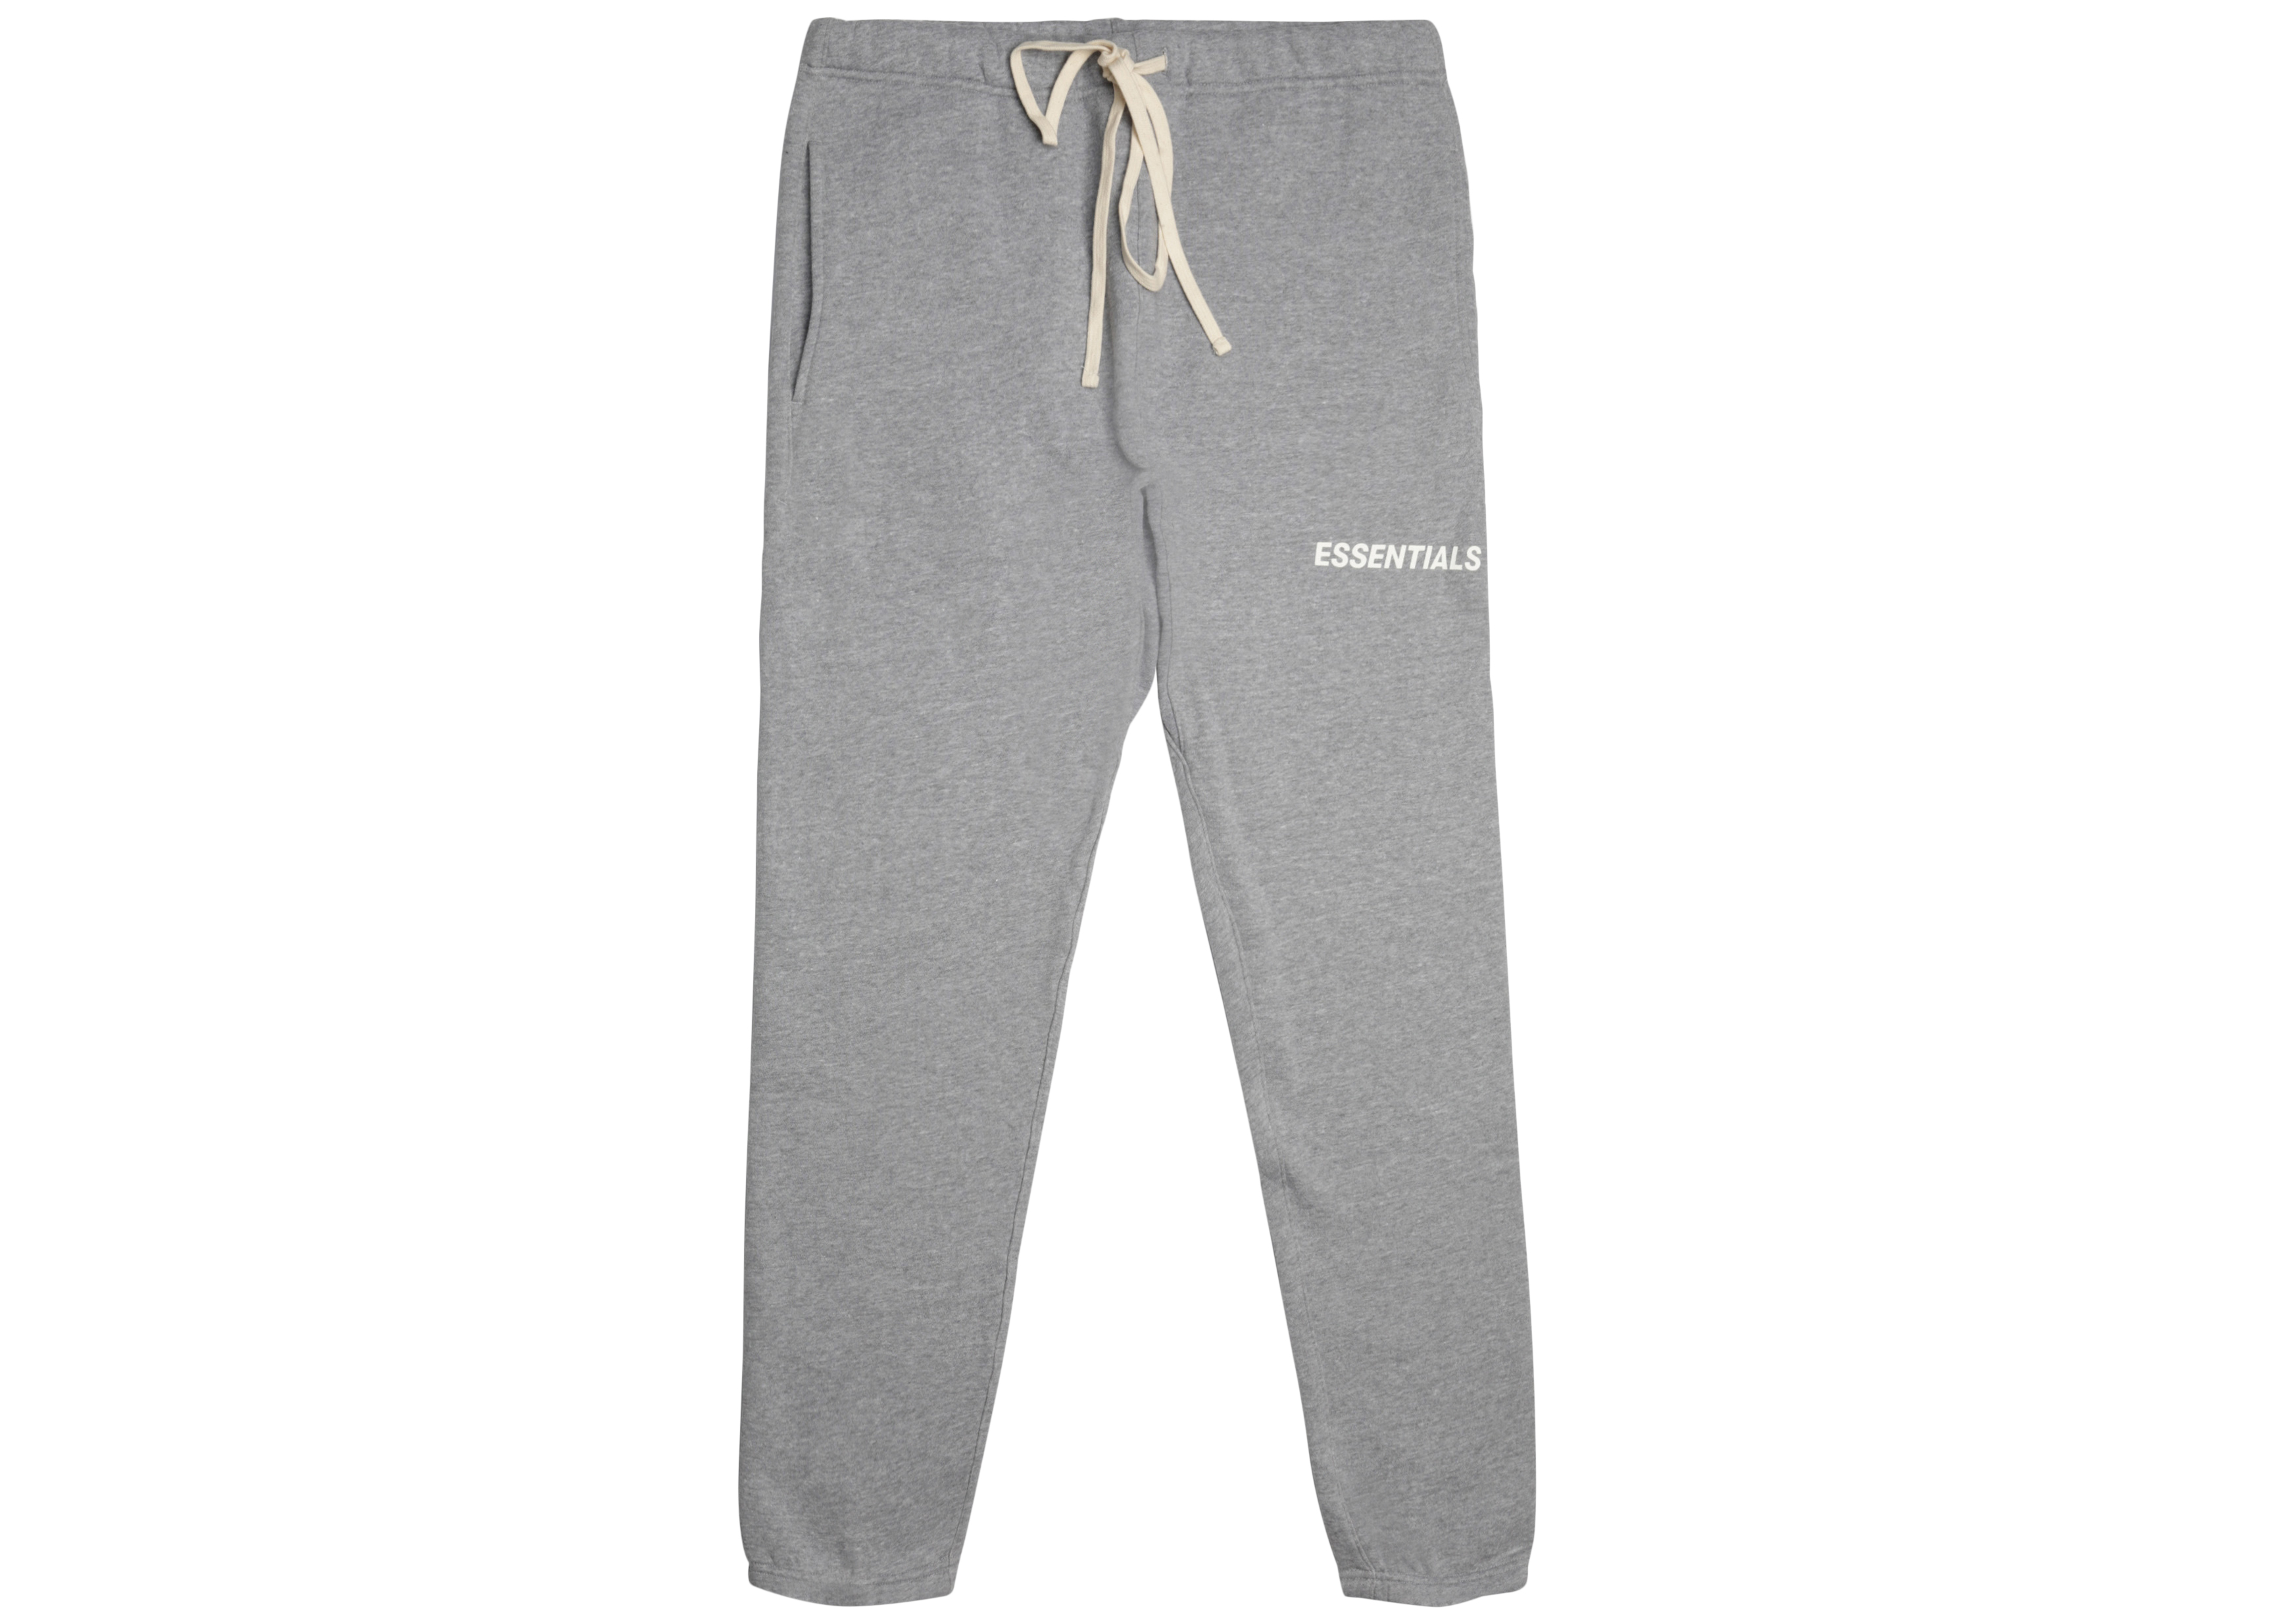 FEAR OF GOD Essentials Graphic Sweatpants Grey/White